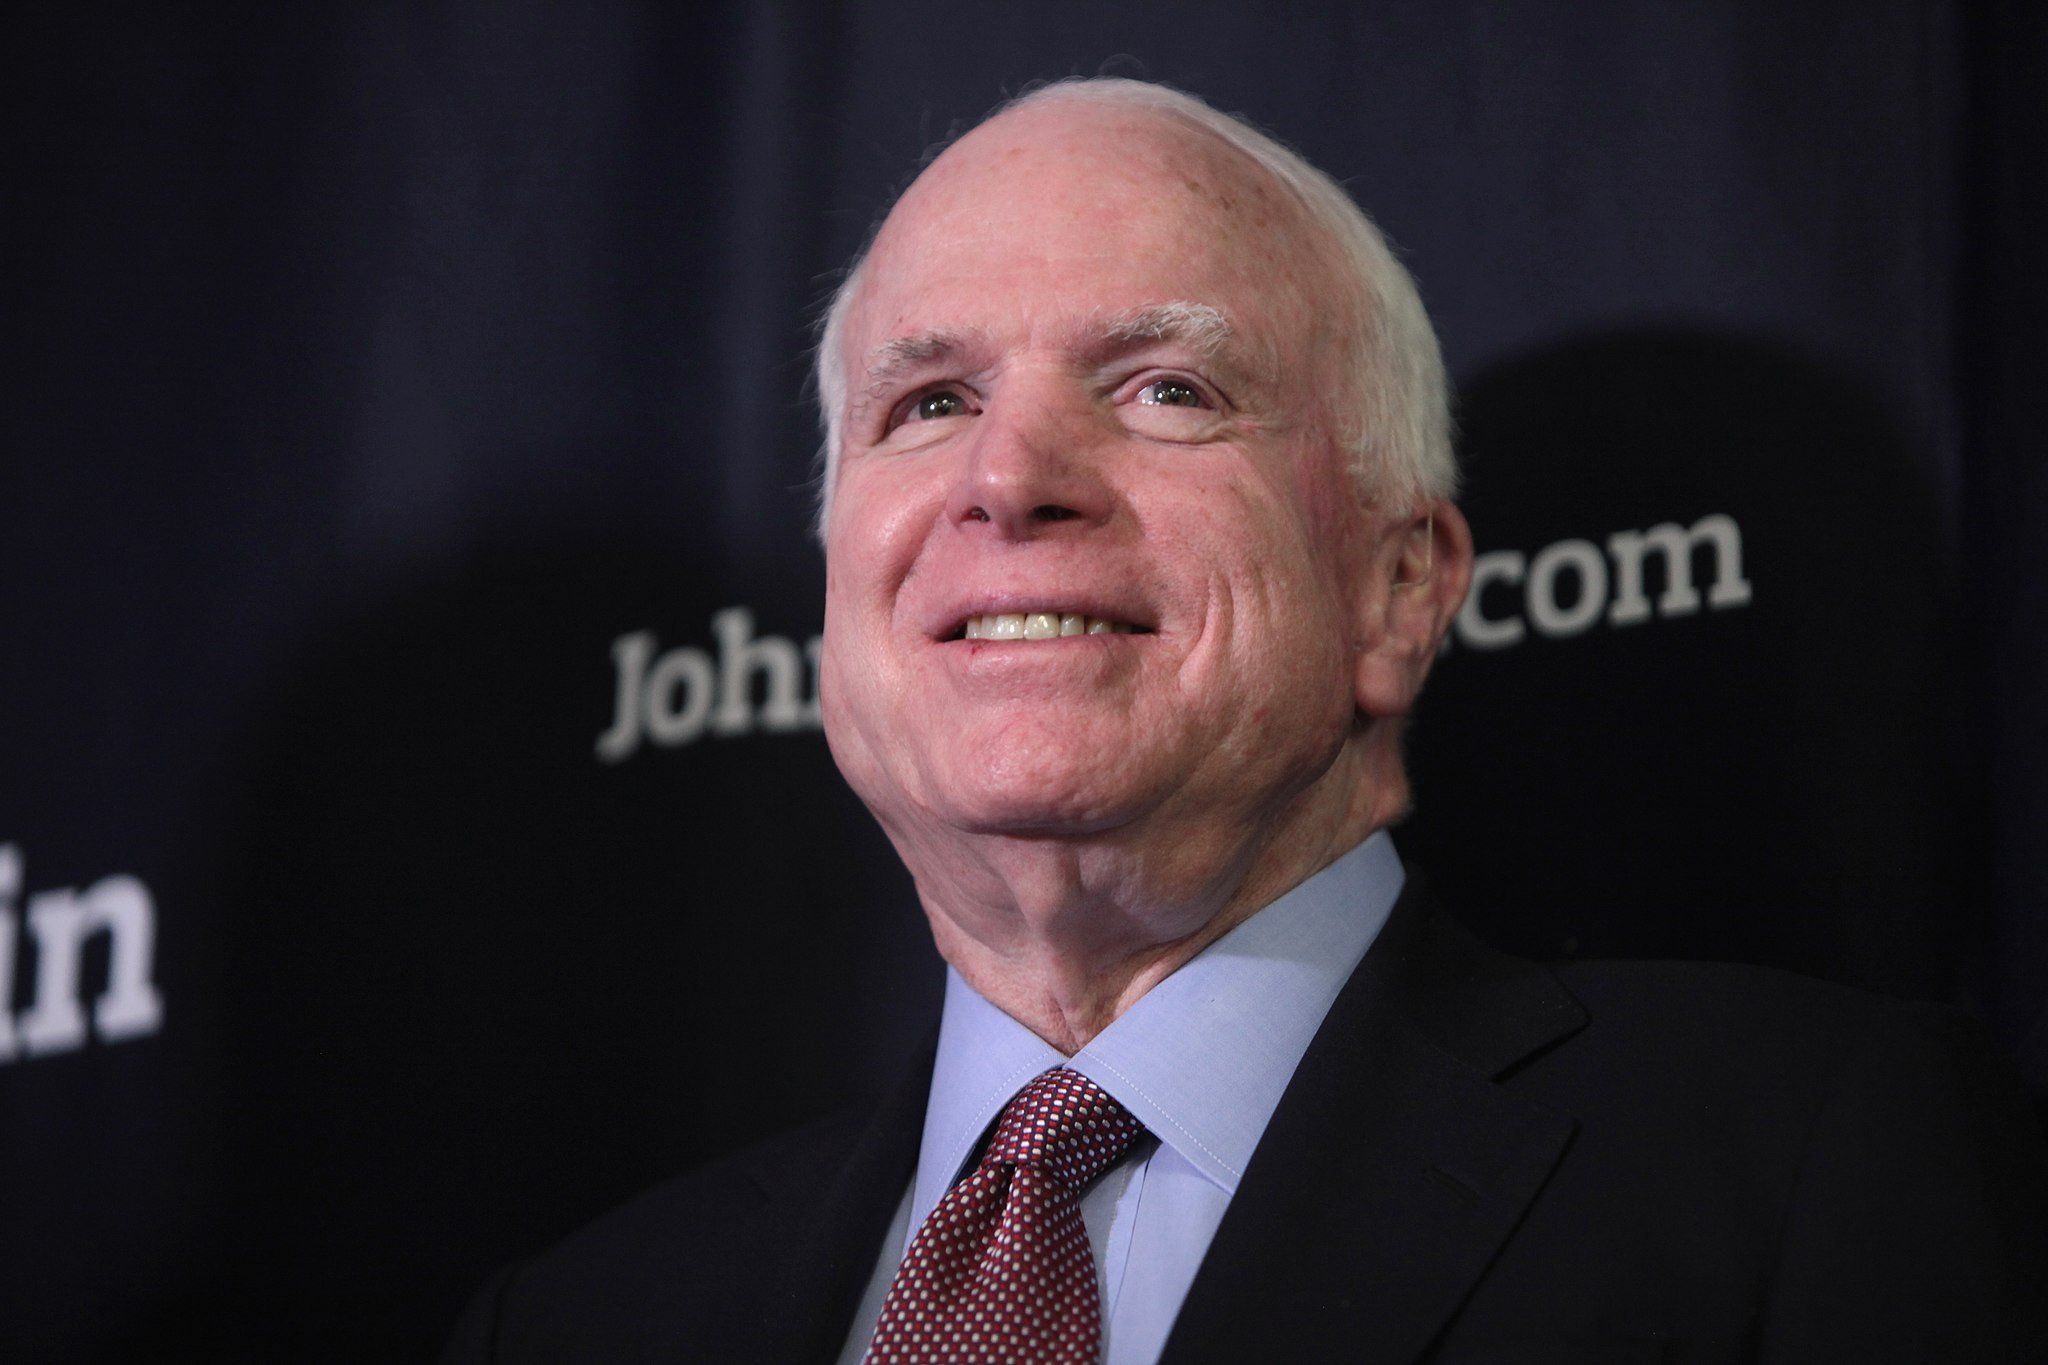 John mccain calls wife a cunt Quality Adult free site compilation hq nude photo